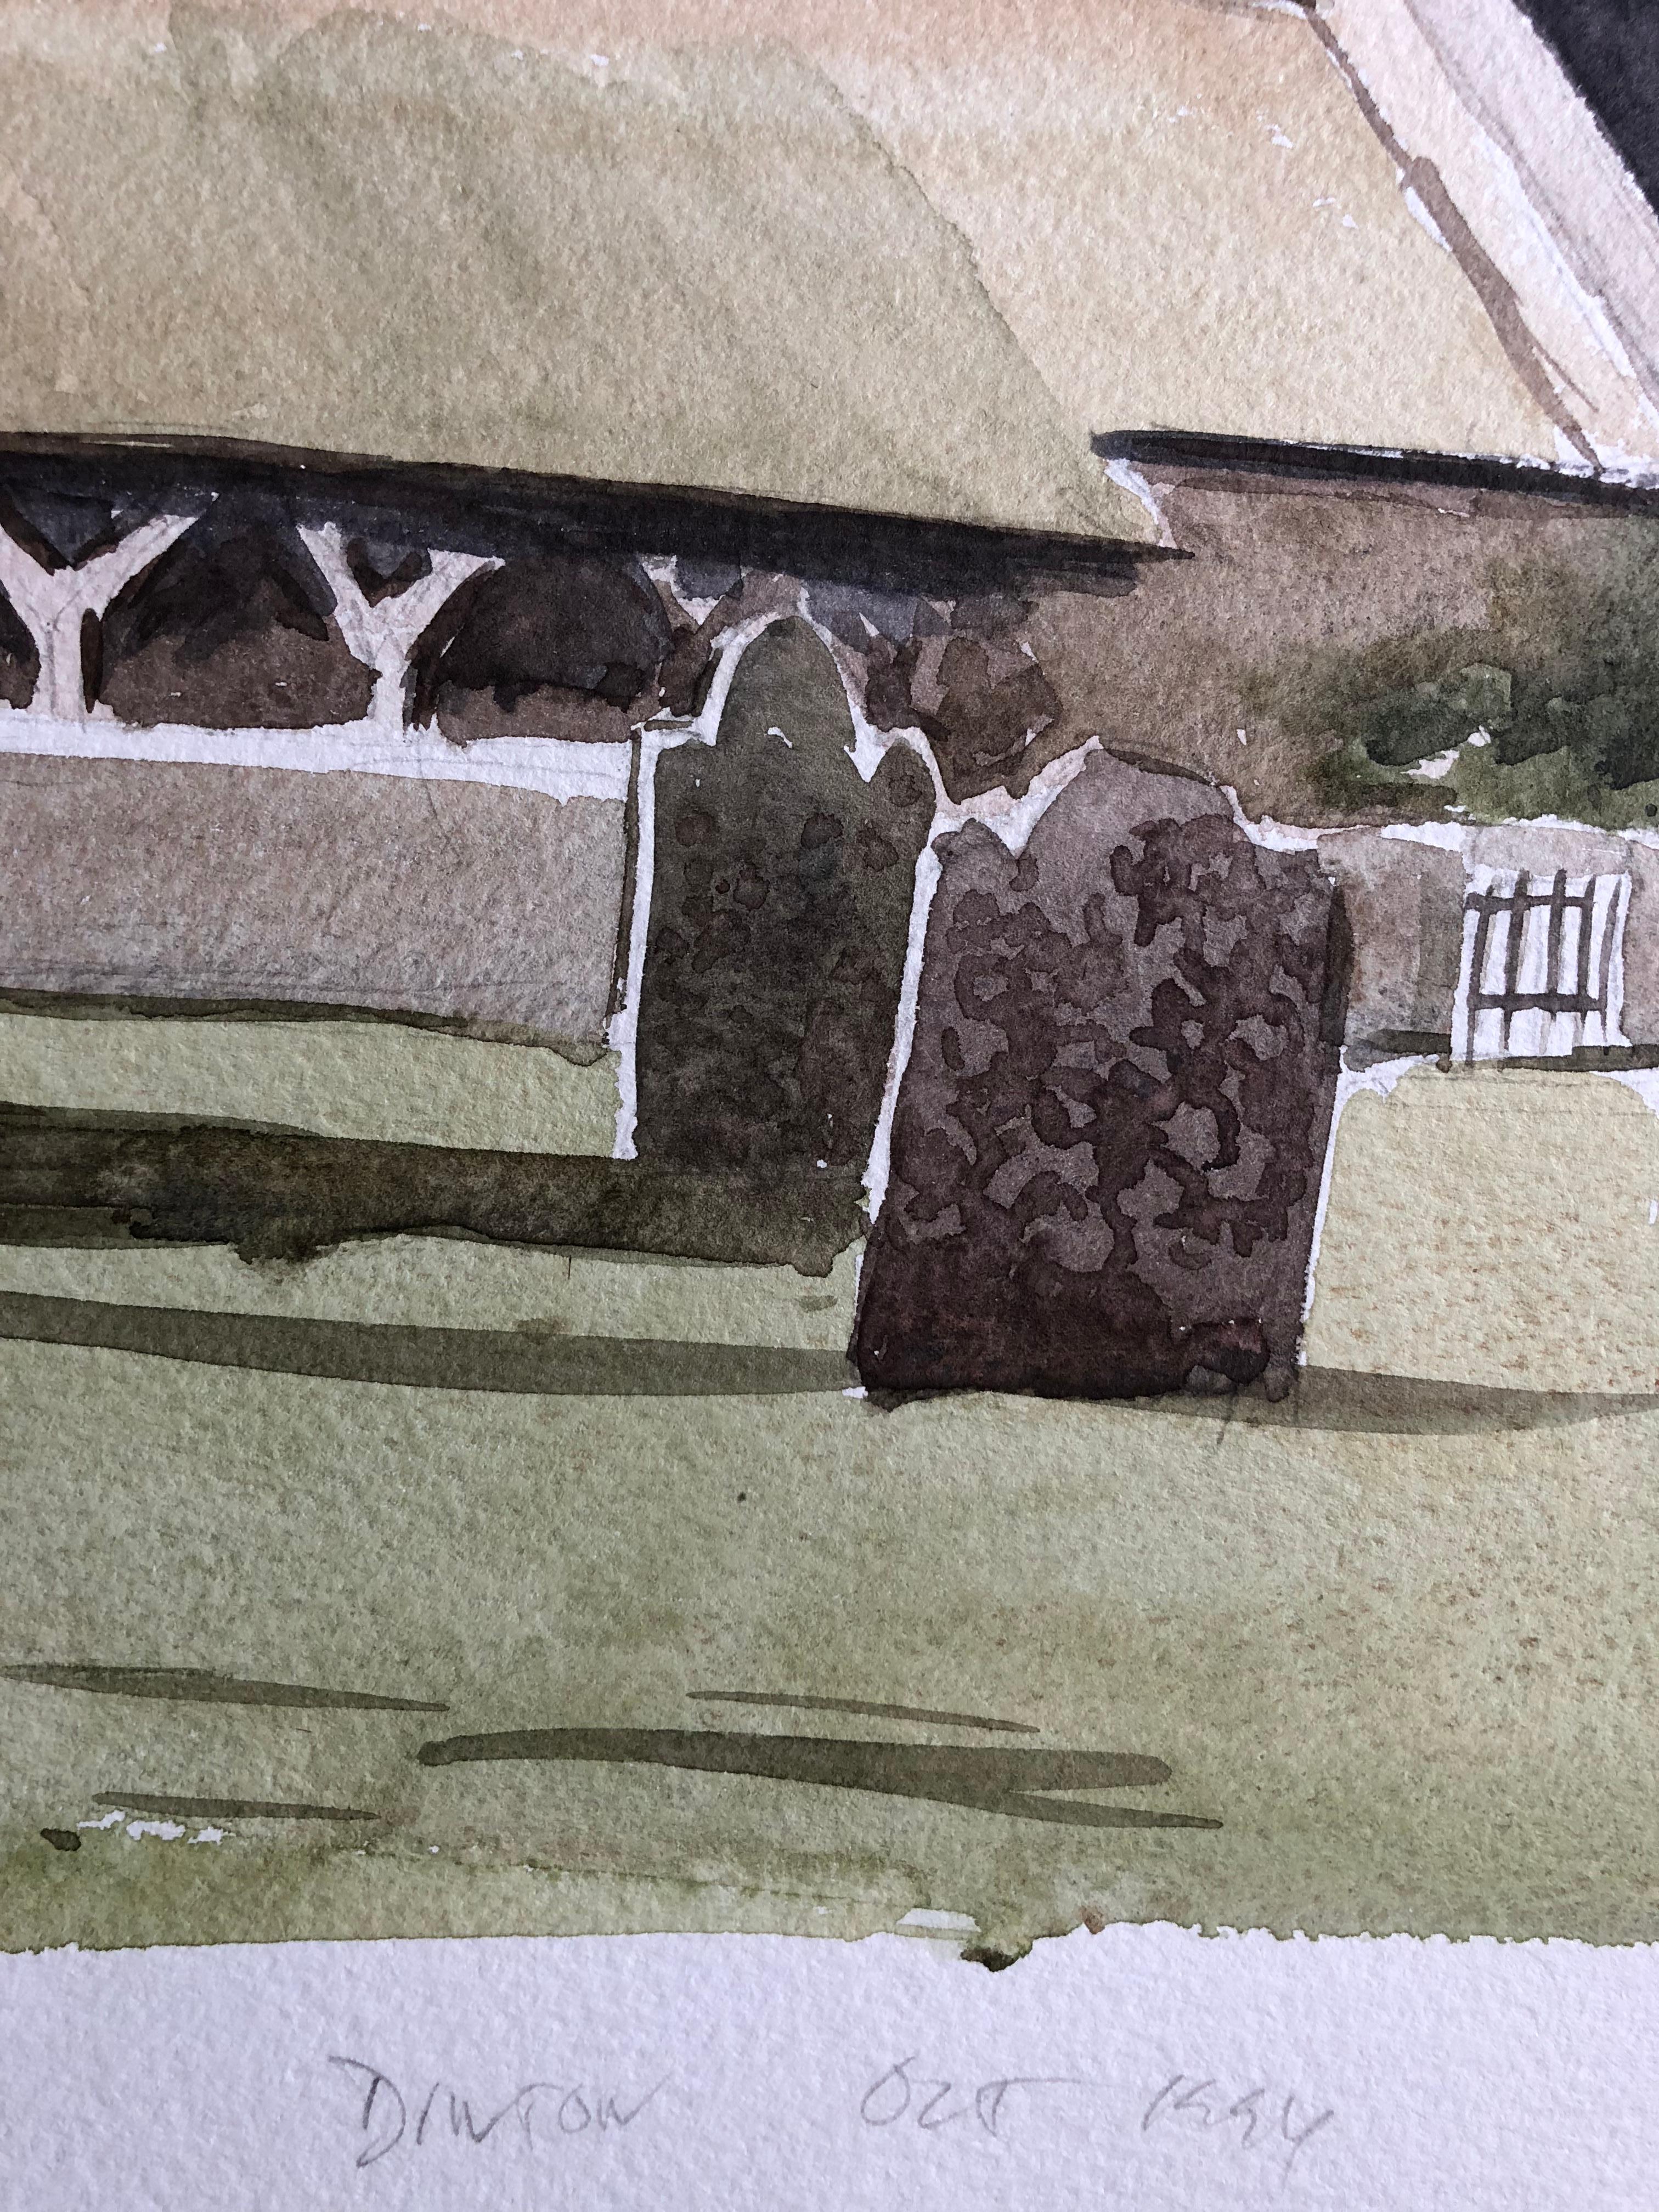 Dinton Cemetary, original British watercolour painting - Painting by Ronald Birch